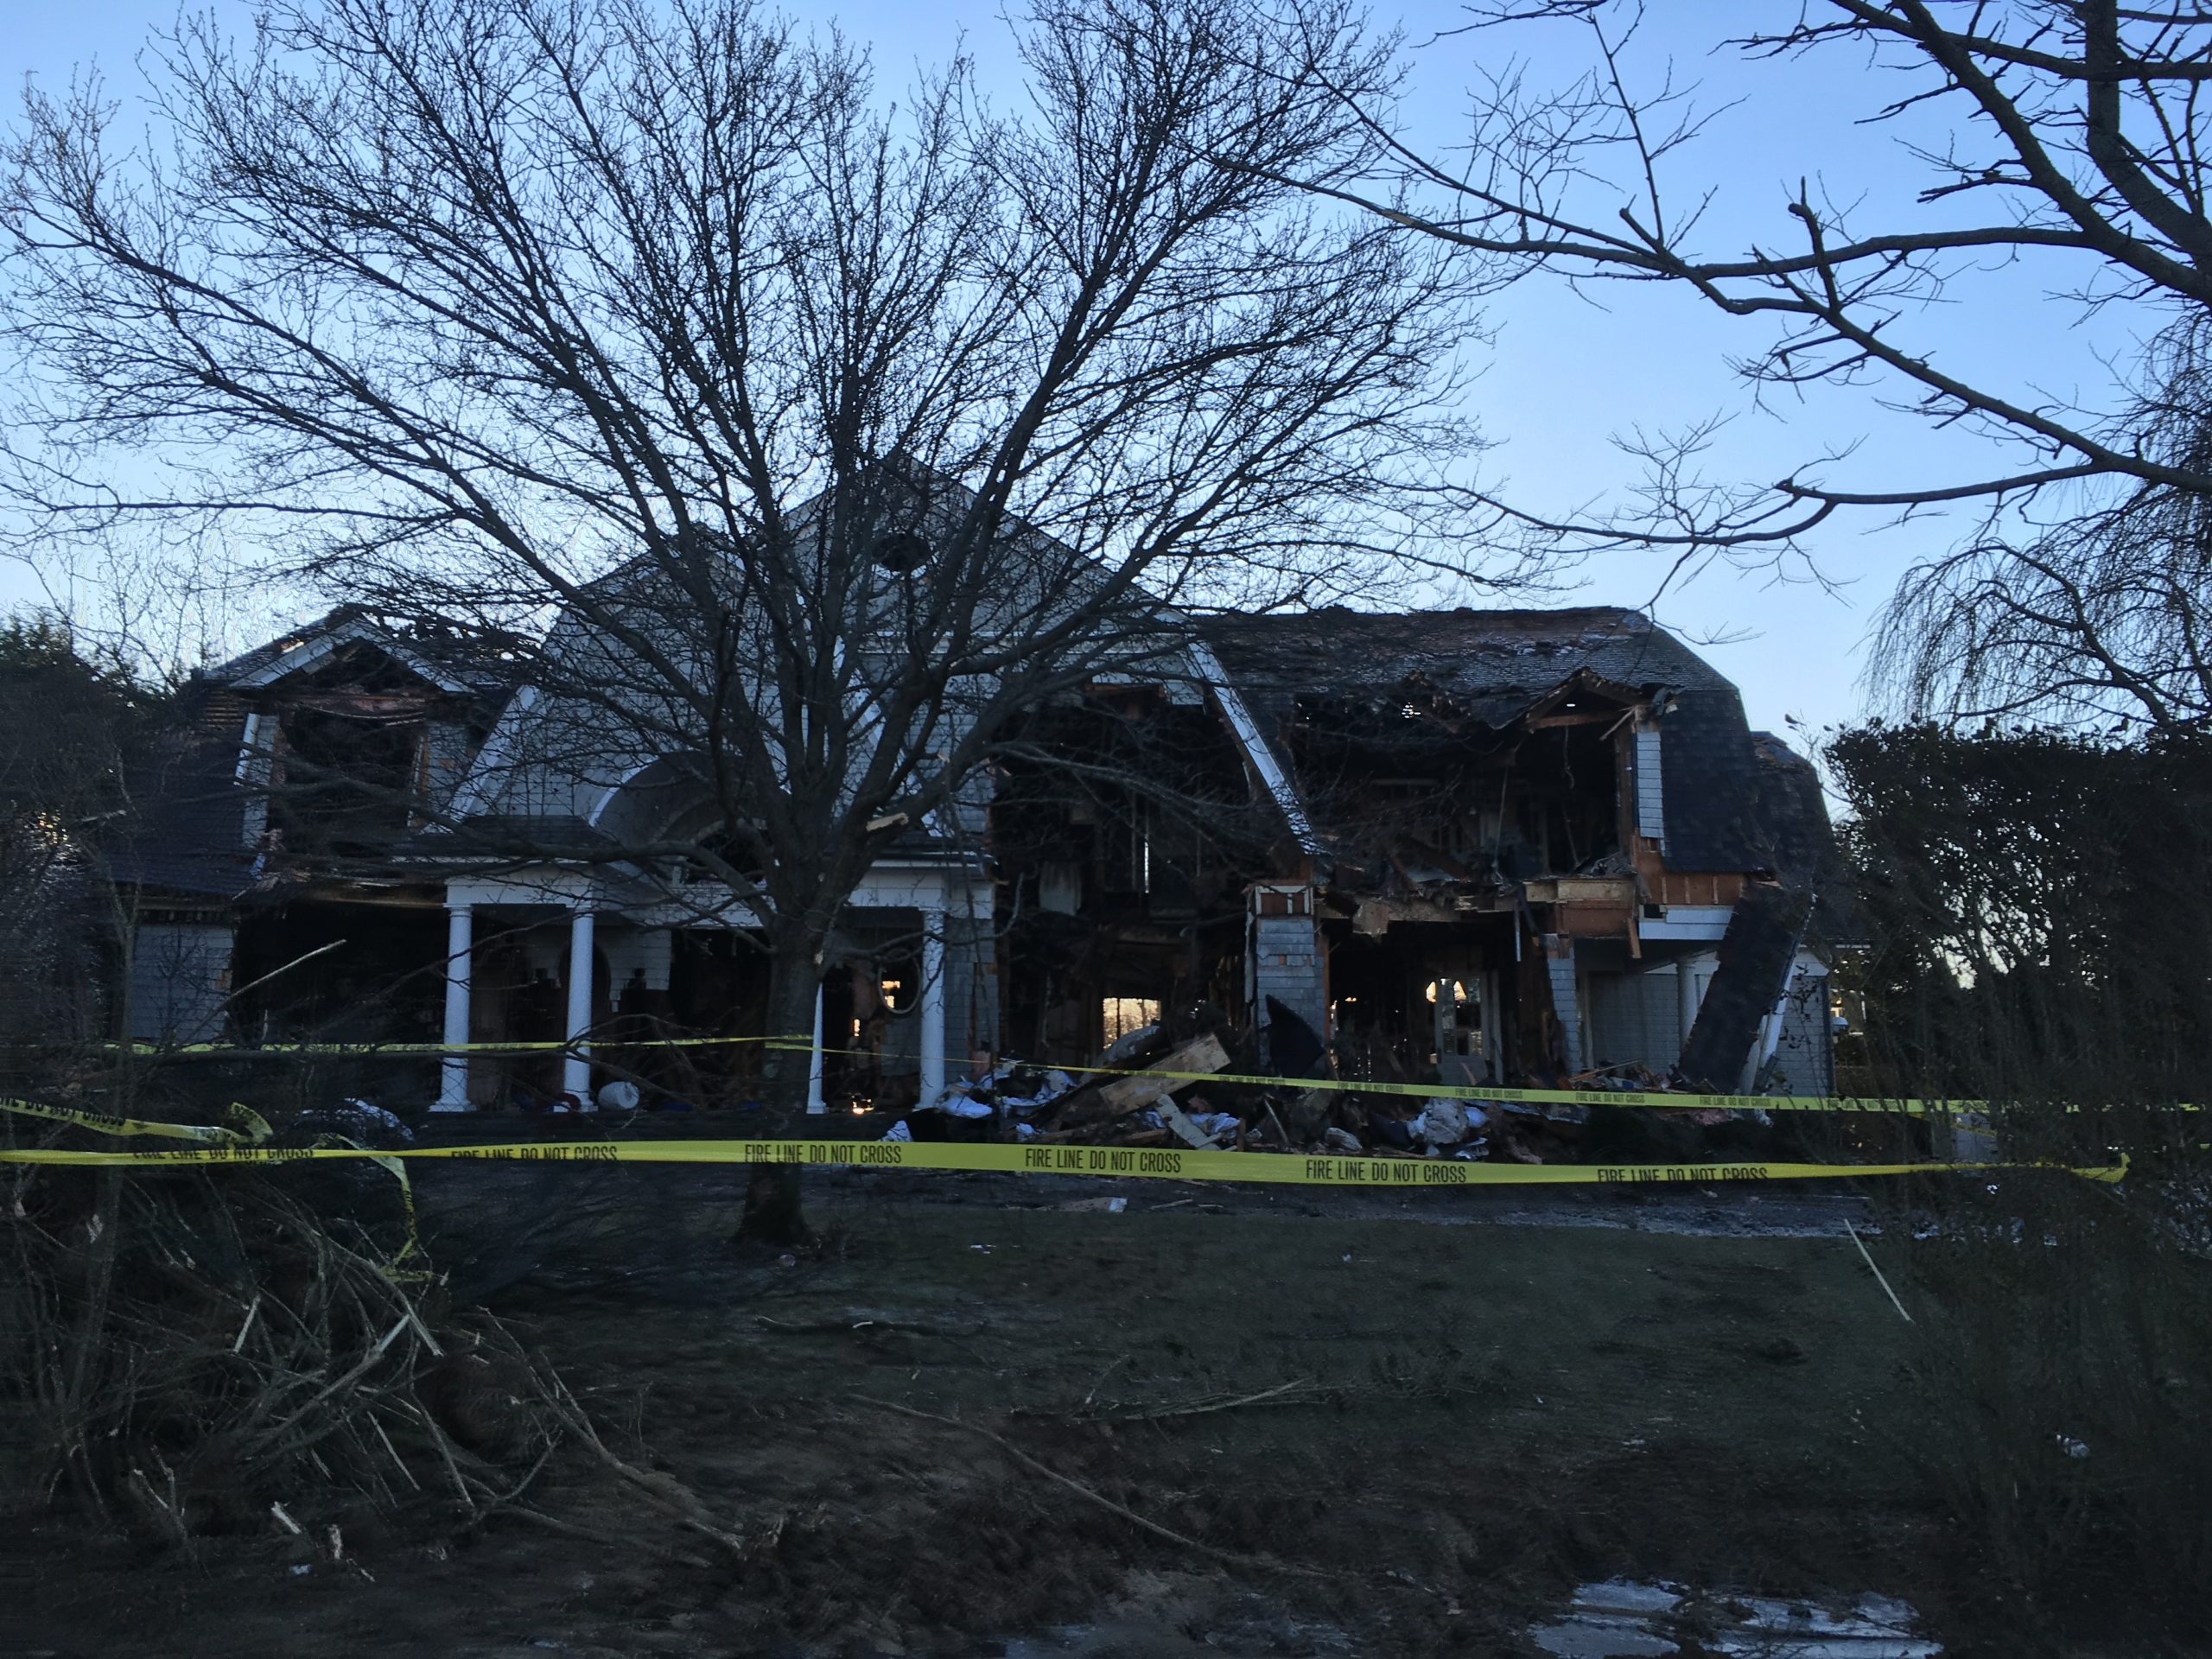 Police tape cordons off  the remains of the Bridgehampton home gutted by fire Thursday. KITTY MERRILL